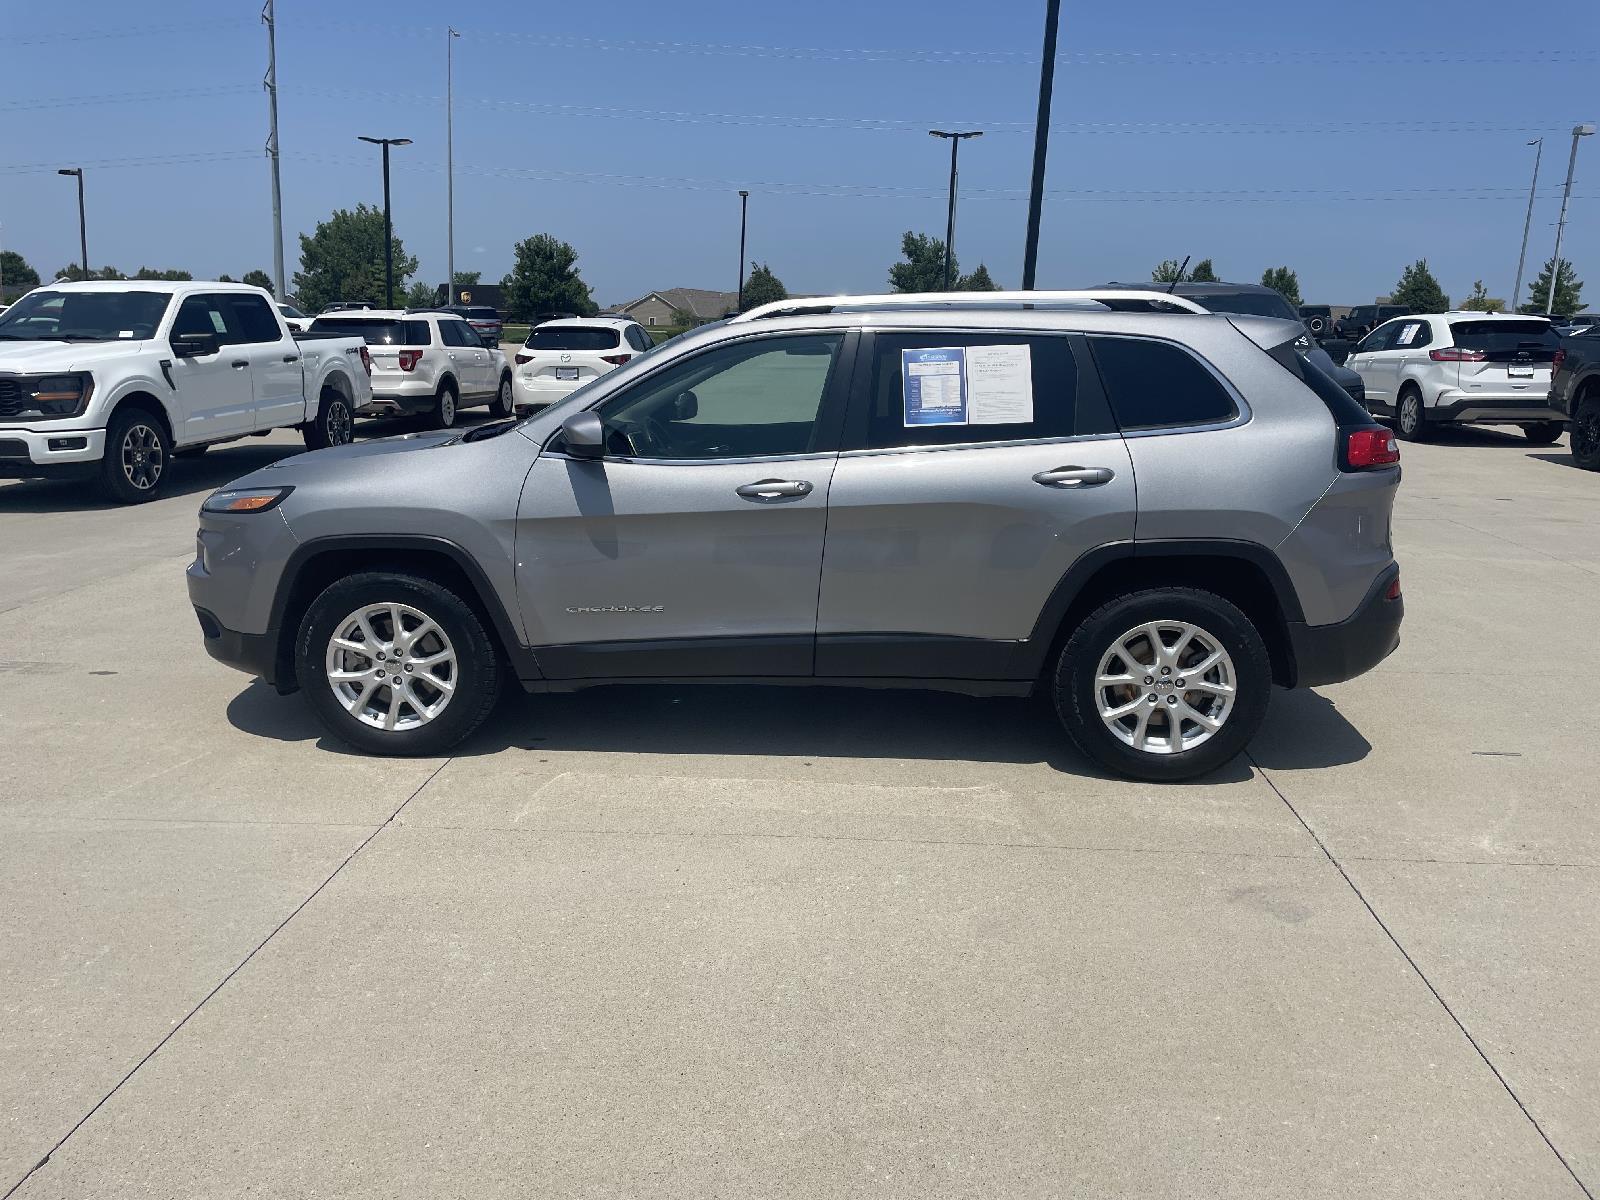 Used 2014 Jeep Cherokee Latitude with VIN 1C4PJMCS4EW247879 for sale in Lincoln, NE